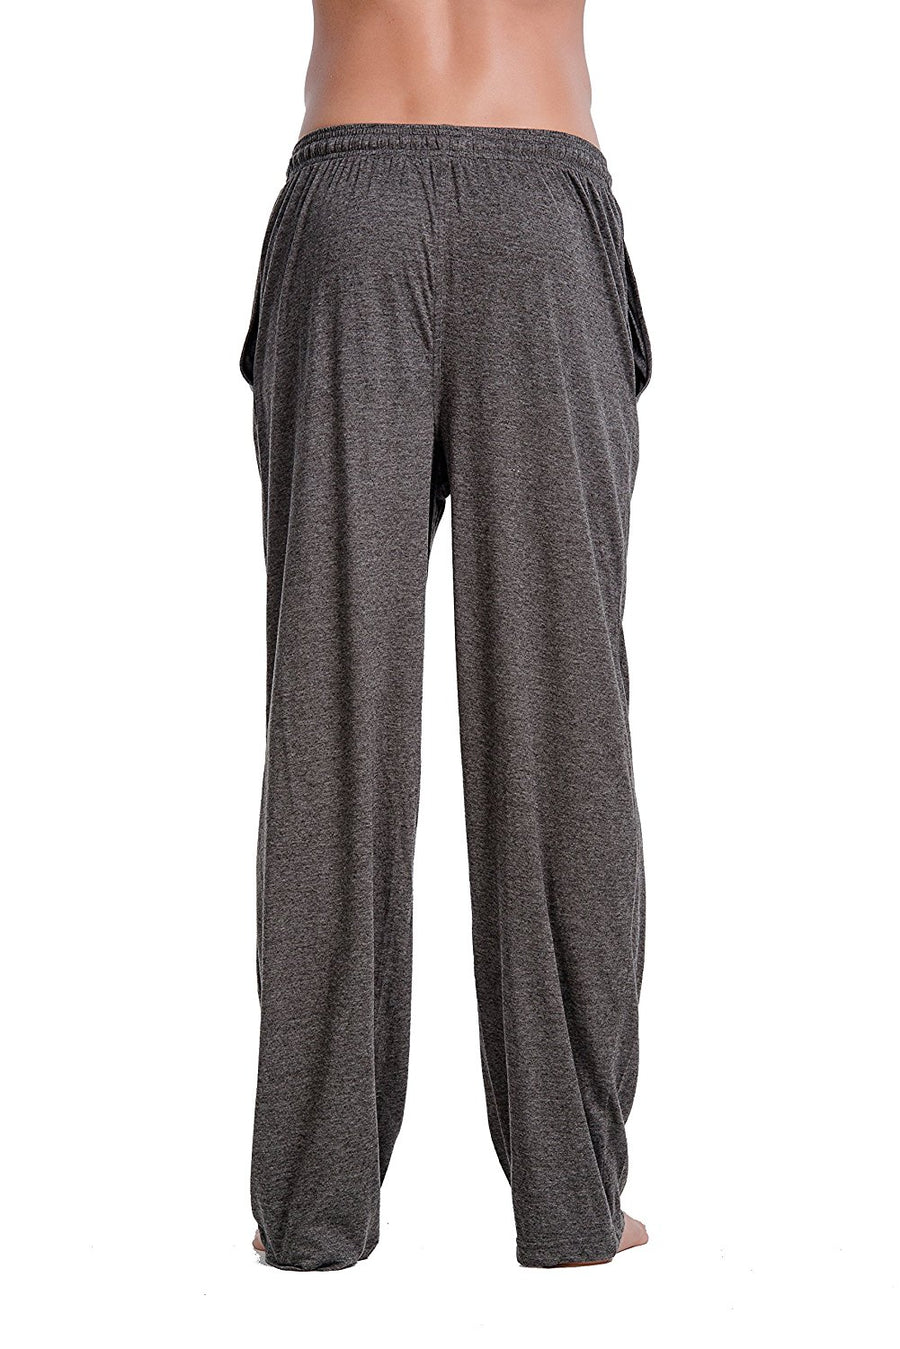 #followme Ultra Soft Solid Stretch Jersey Pajama Pants for Women (Grey With  Black, 2X)